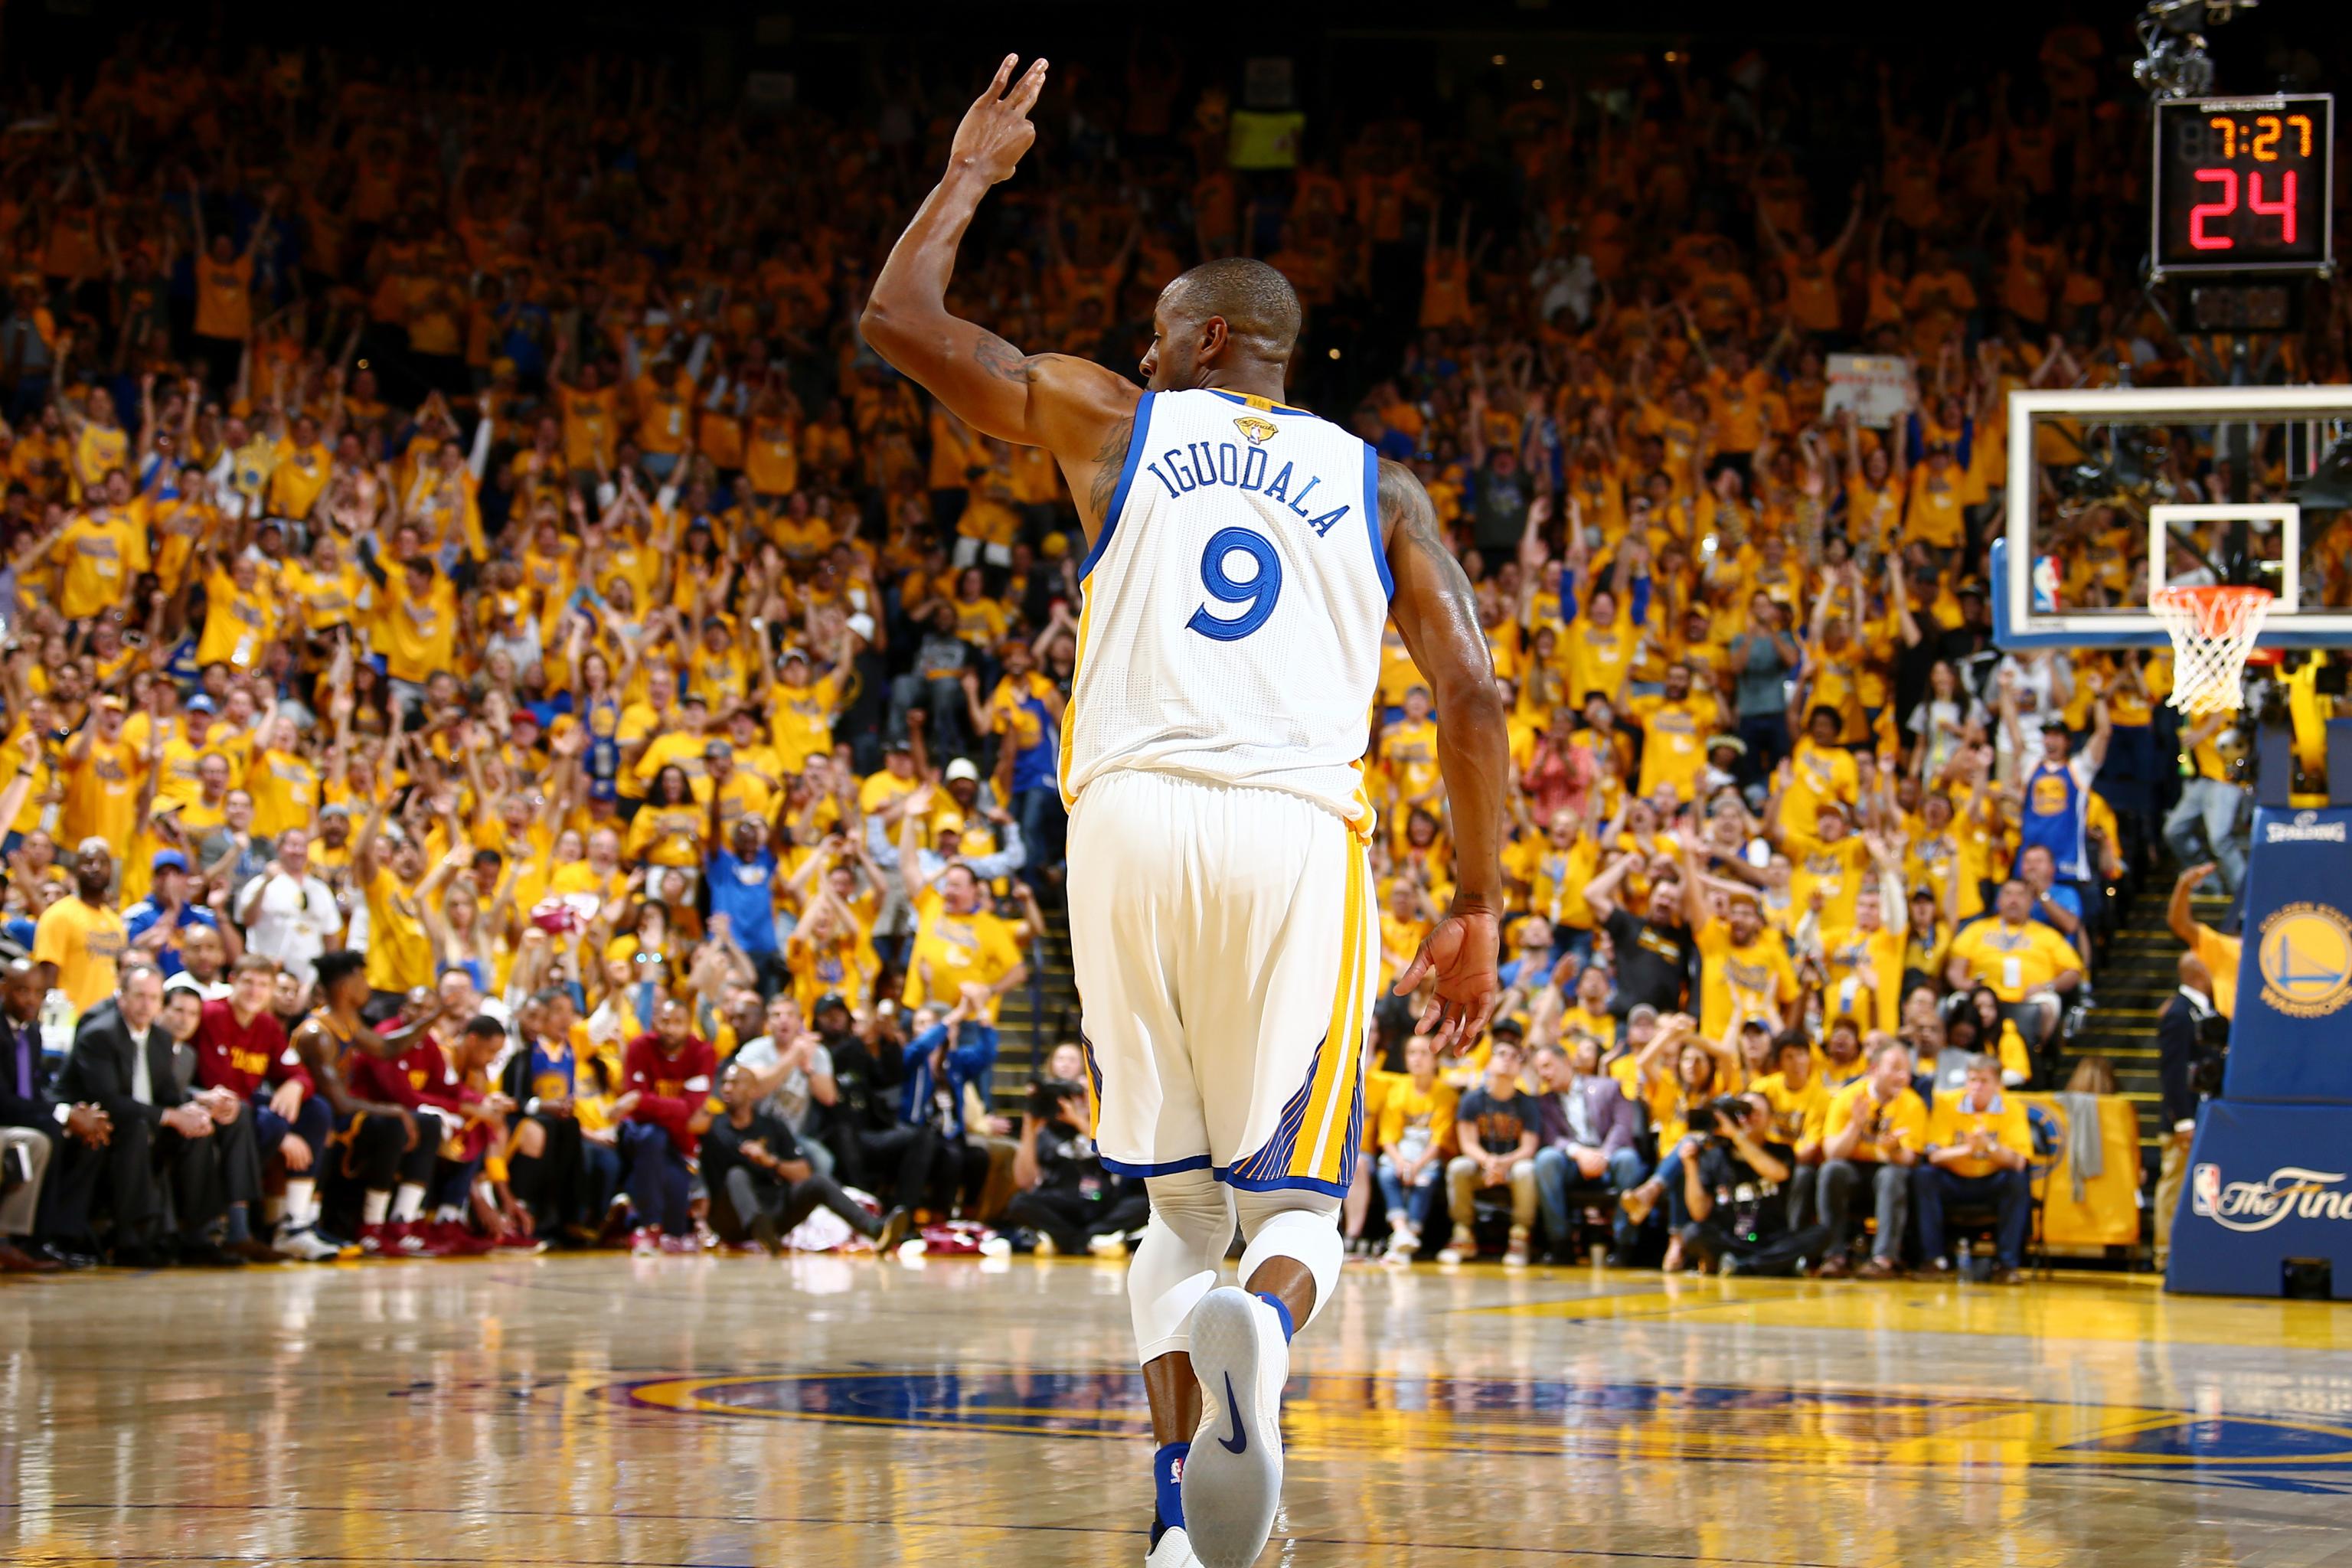 Andre Iguodala Leads the Way // ONE37pm